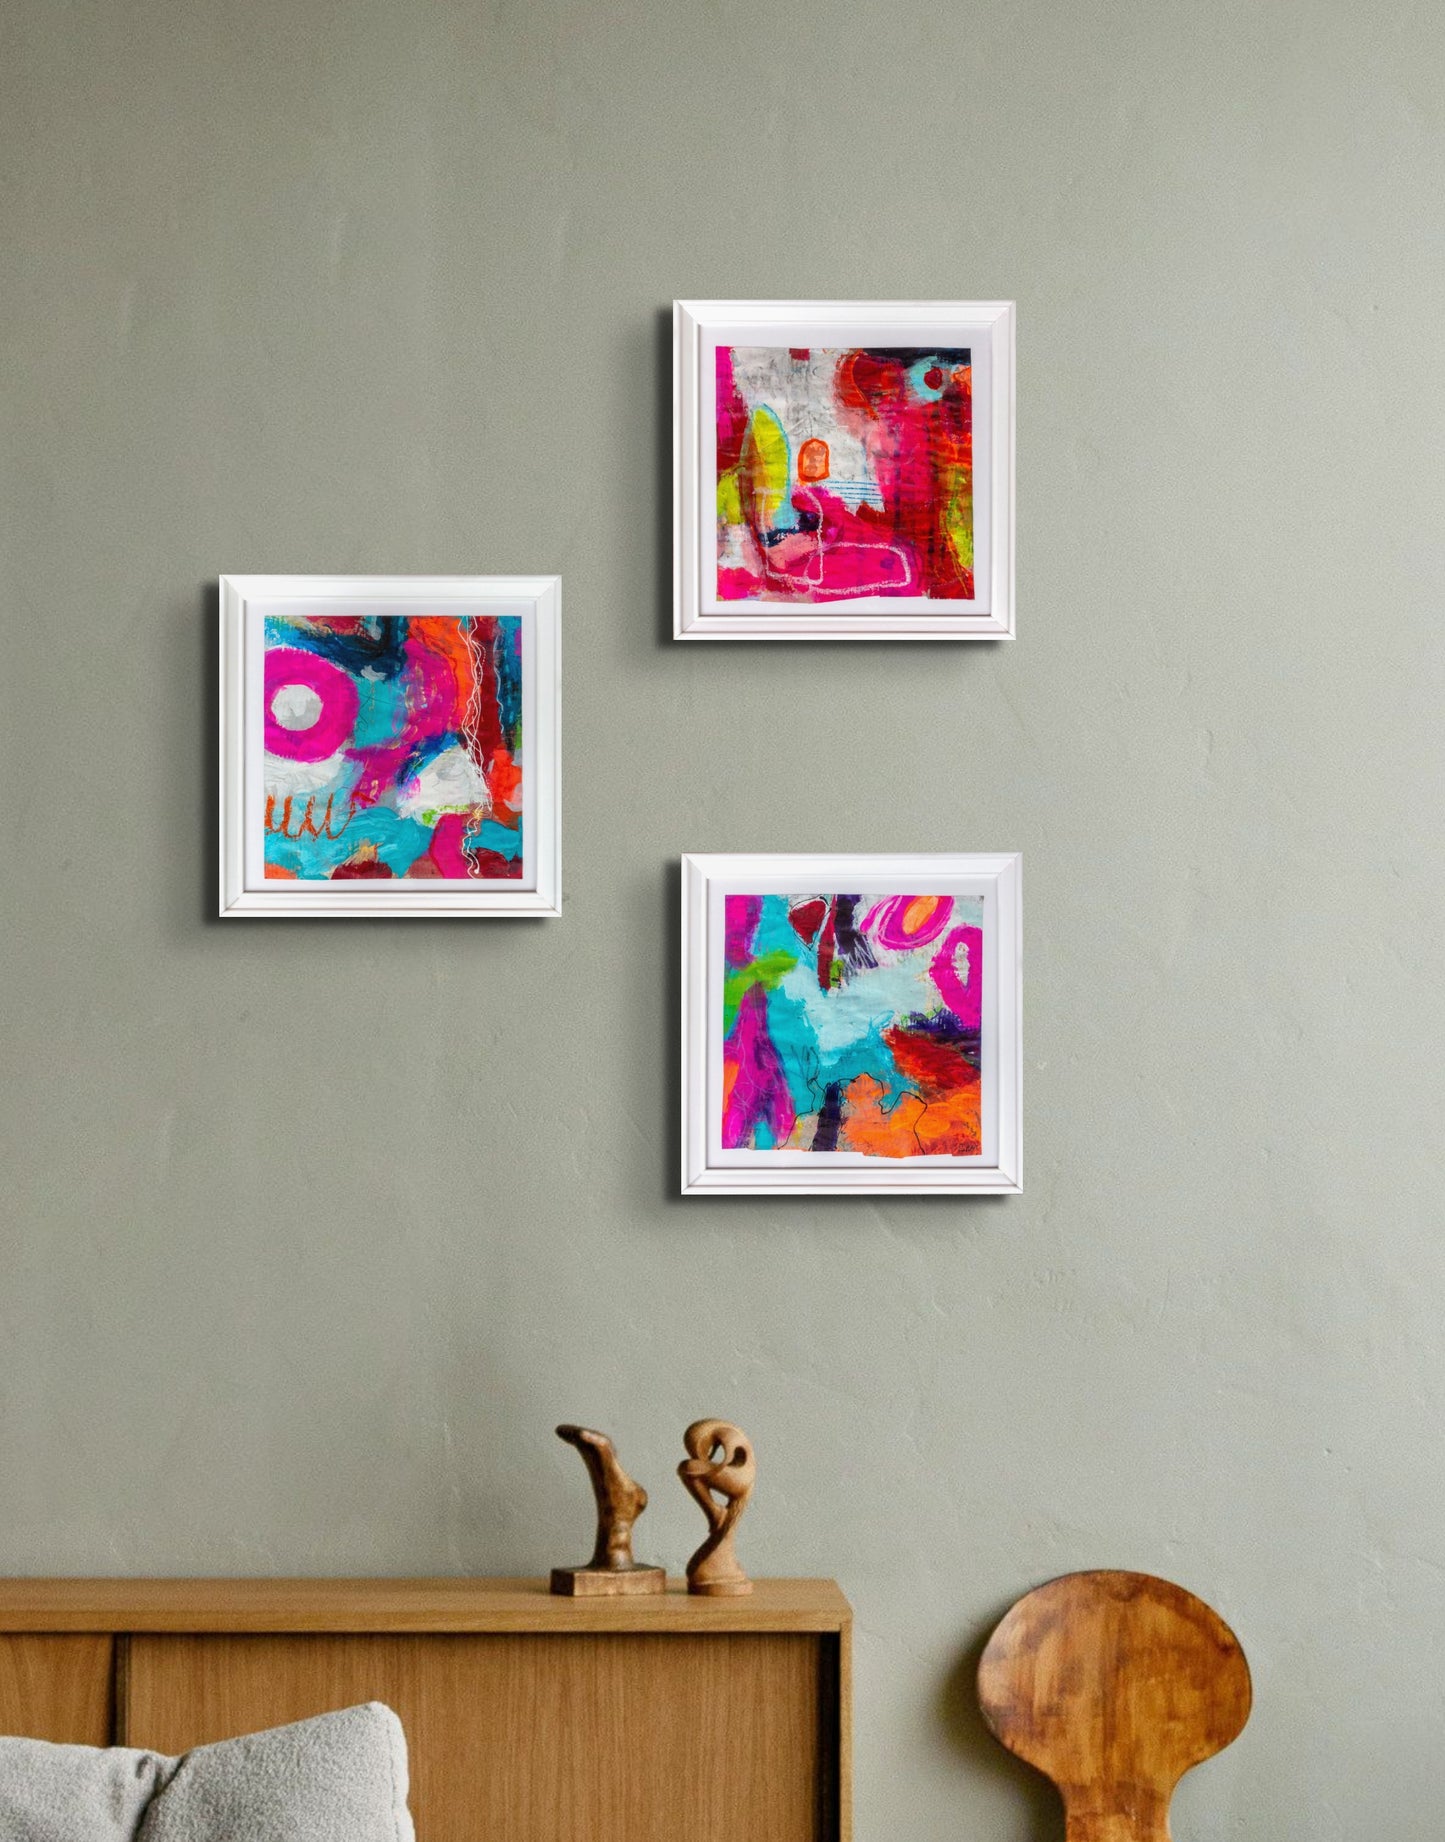 Colorful acrylic abstract painting on paper titled 'Part of the Whole #2' by artist Steffi Möllers; measures app 7.5"x7.5"; w/frame measures 10"x10"; image is paired with two other abstracts by same artist hanging in situ on wall.